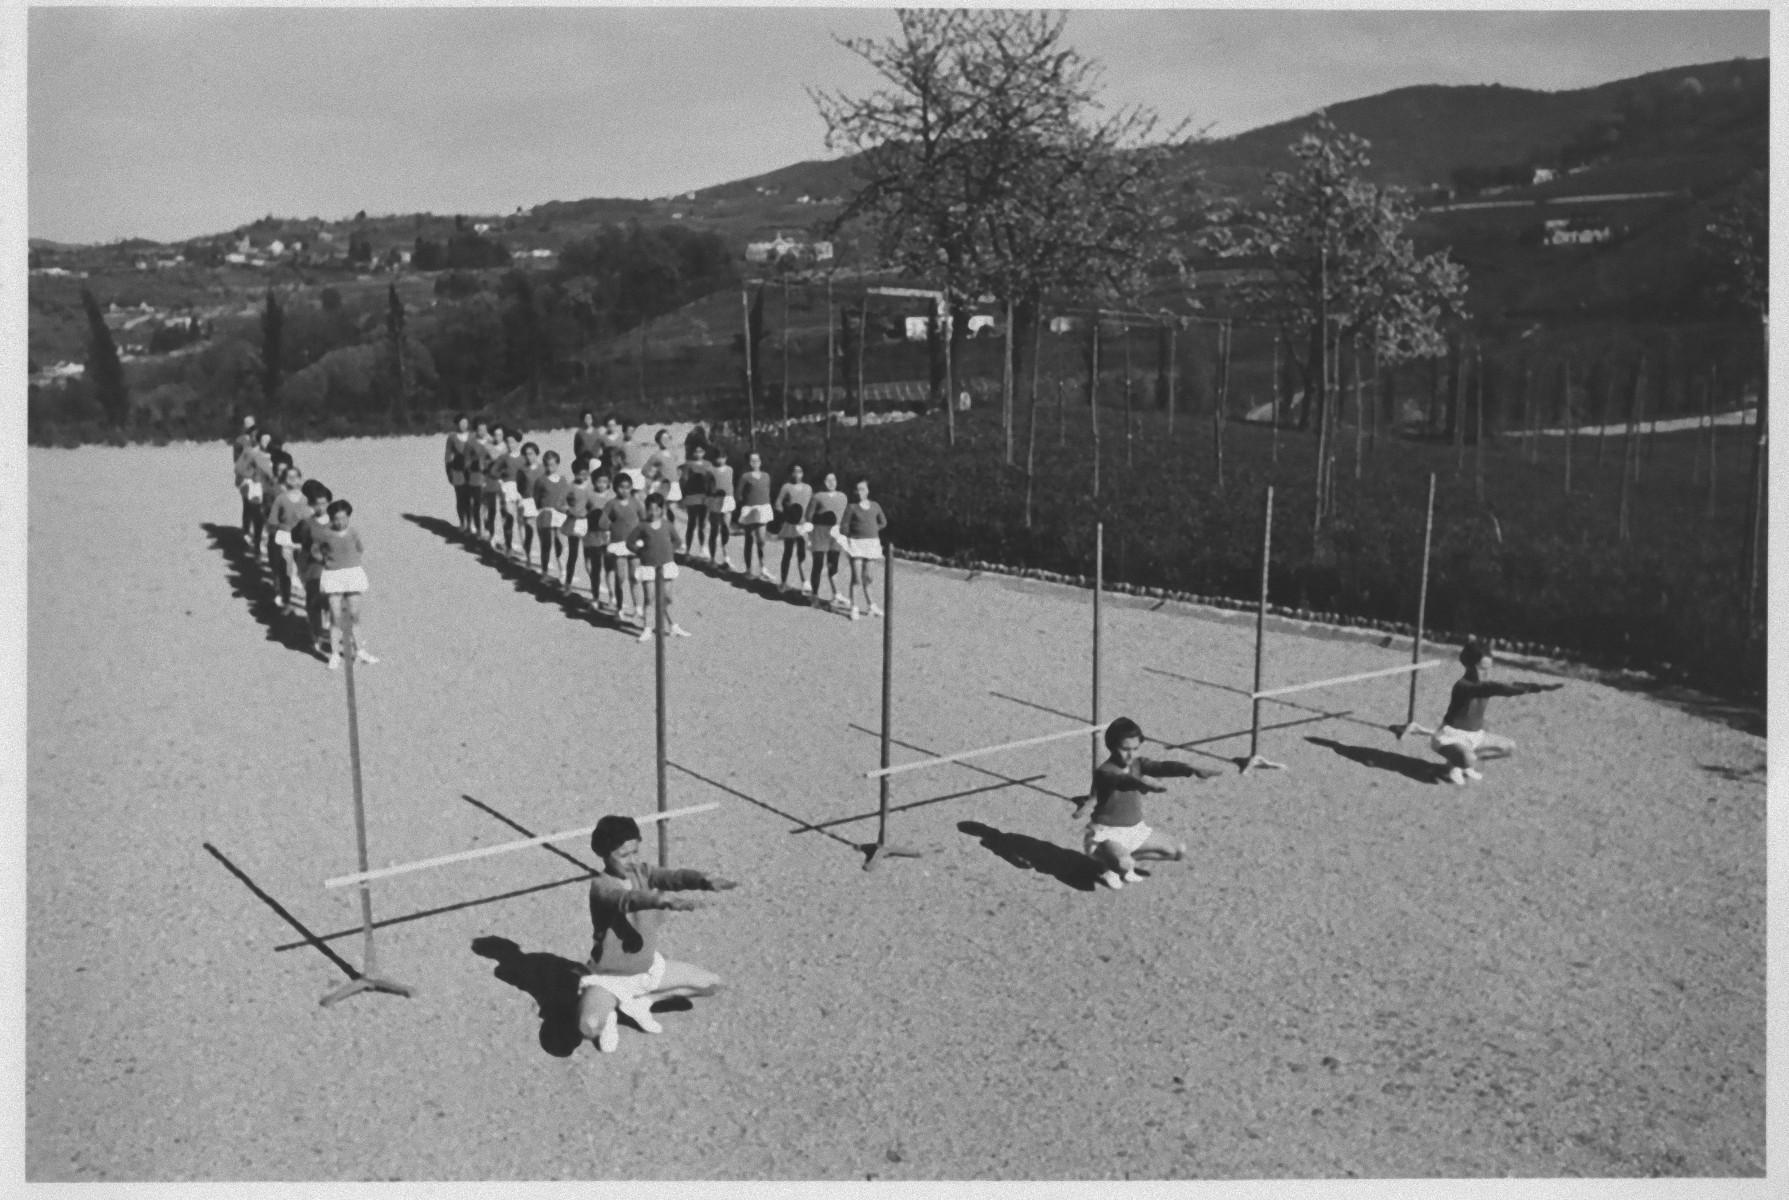 Unknown Figurative Photograph - Outdoor Physical Education during Fascism in Italy - b/w Photo - 1930 c.a.